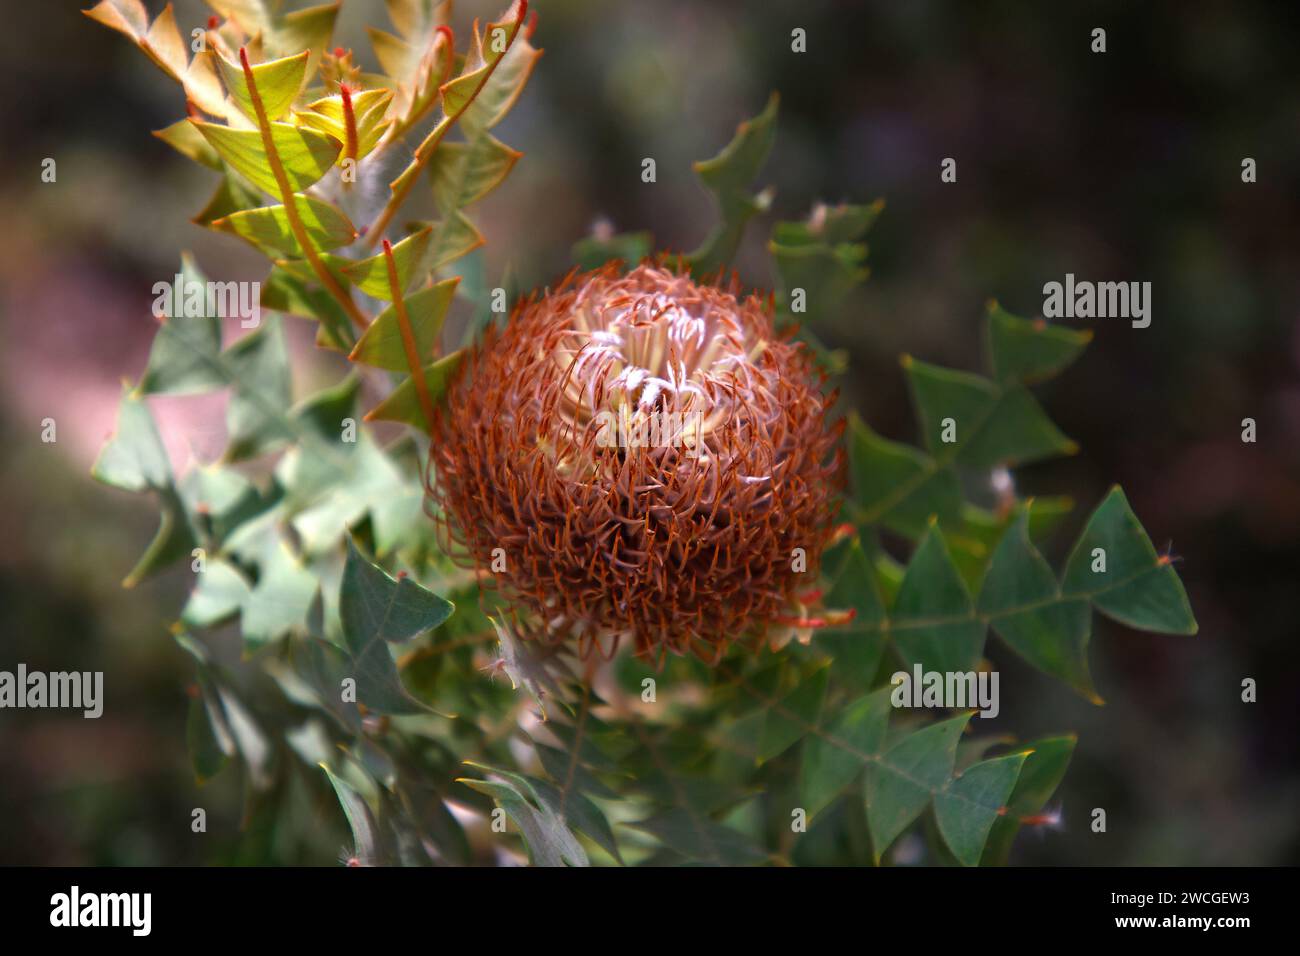 Closeup of the flower of the native plant Banksia baxteri. Stock Photo